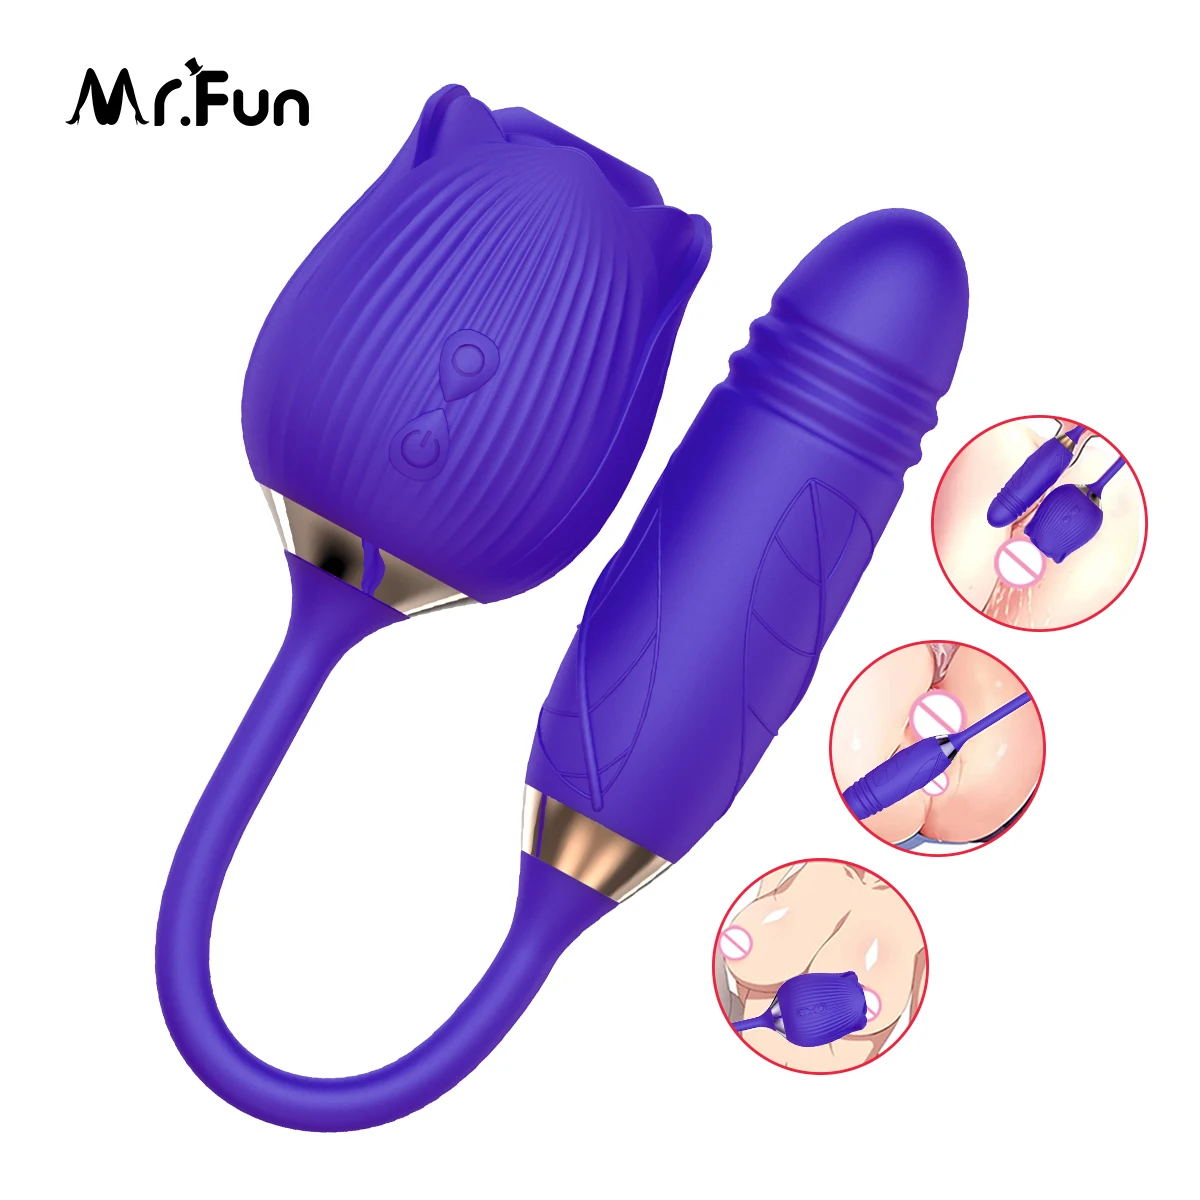 MR.Fun Amazon Black Rose Sex Toys G Spot Clit Sucking Silicon Extened Dildo With String 2 In 9 modes Waterproof Rose Vibrator (1600314696164)